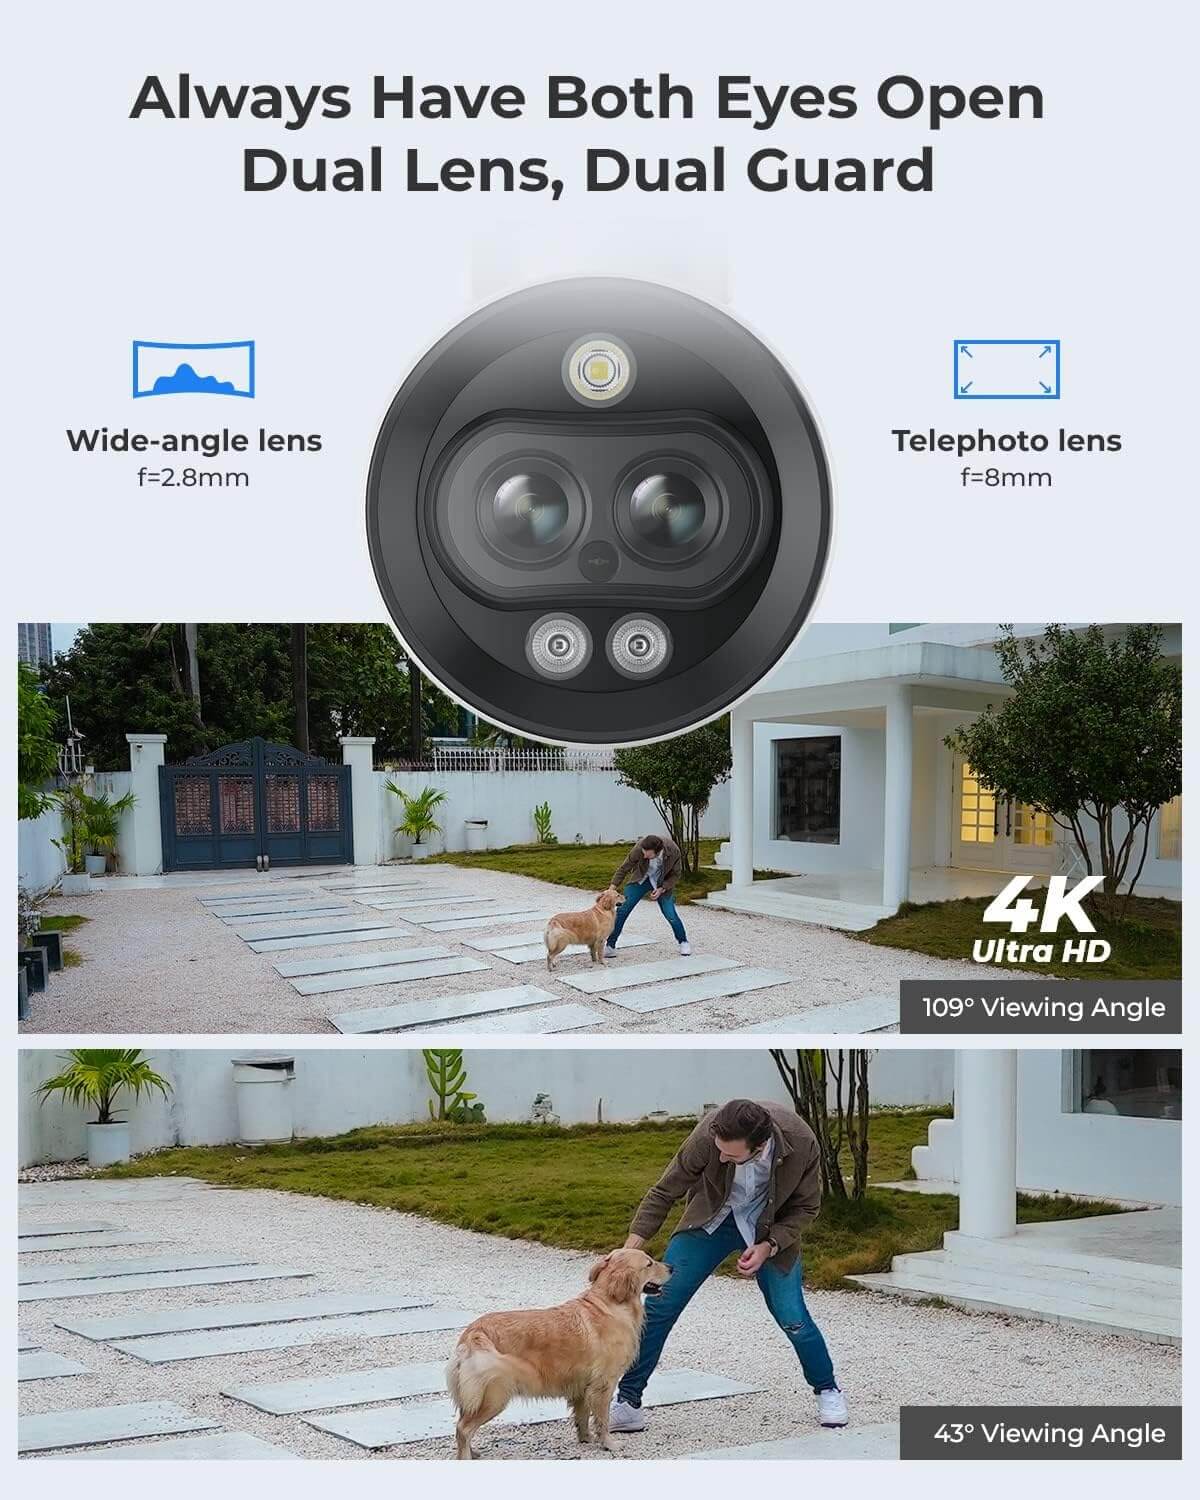 Advanced 8MP (3840 x 2160) Video Surveillance Camera with Adjustable 2.8-8mm Lens, 30m Night Vision Range, Built-in Microphone and Speaker, Human and Vehicle Detection, Active Deterrence, and Free Mobile Application - Spy-shop.com